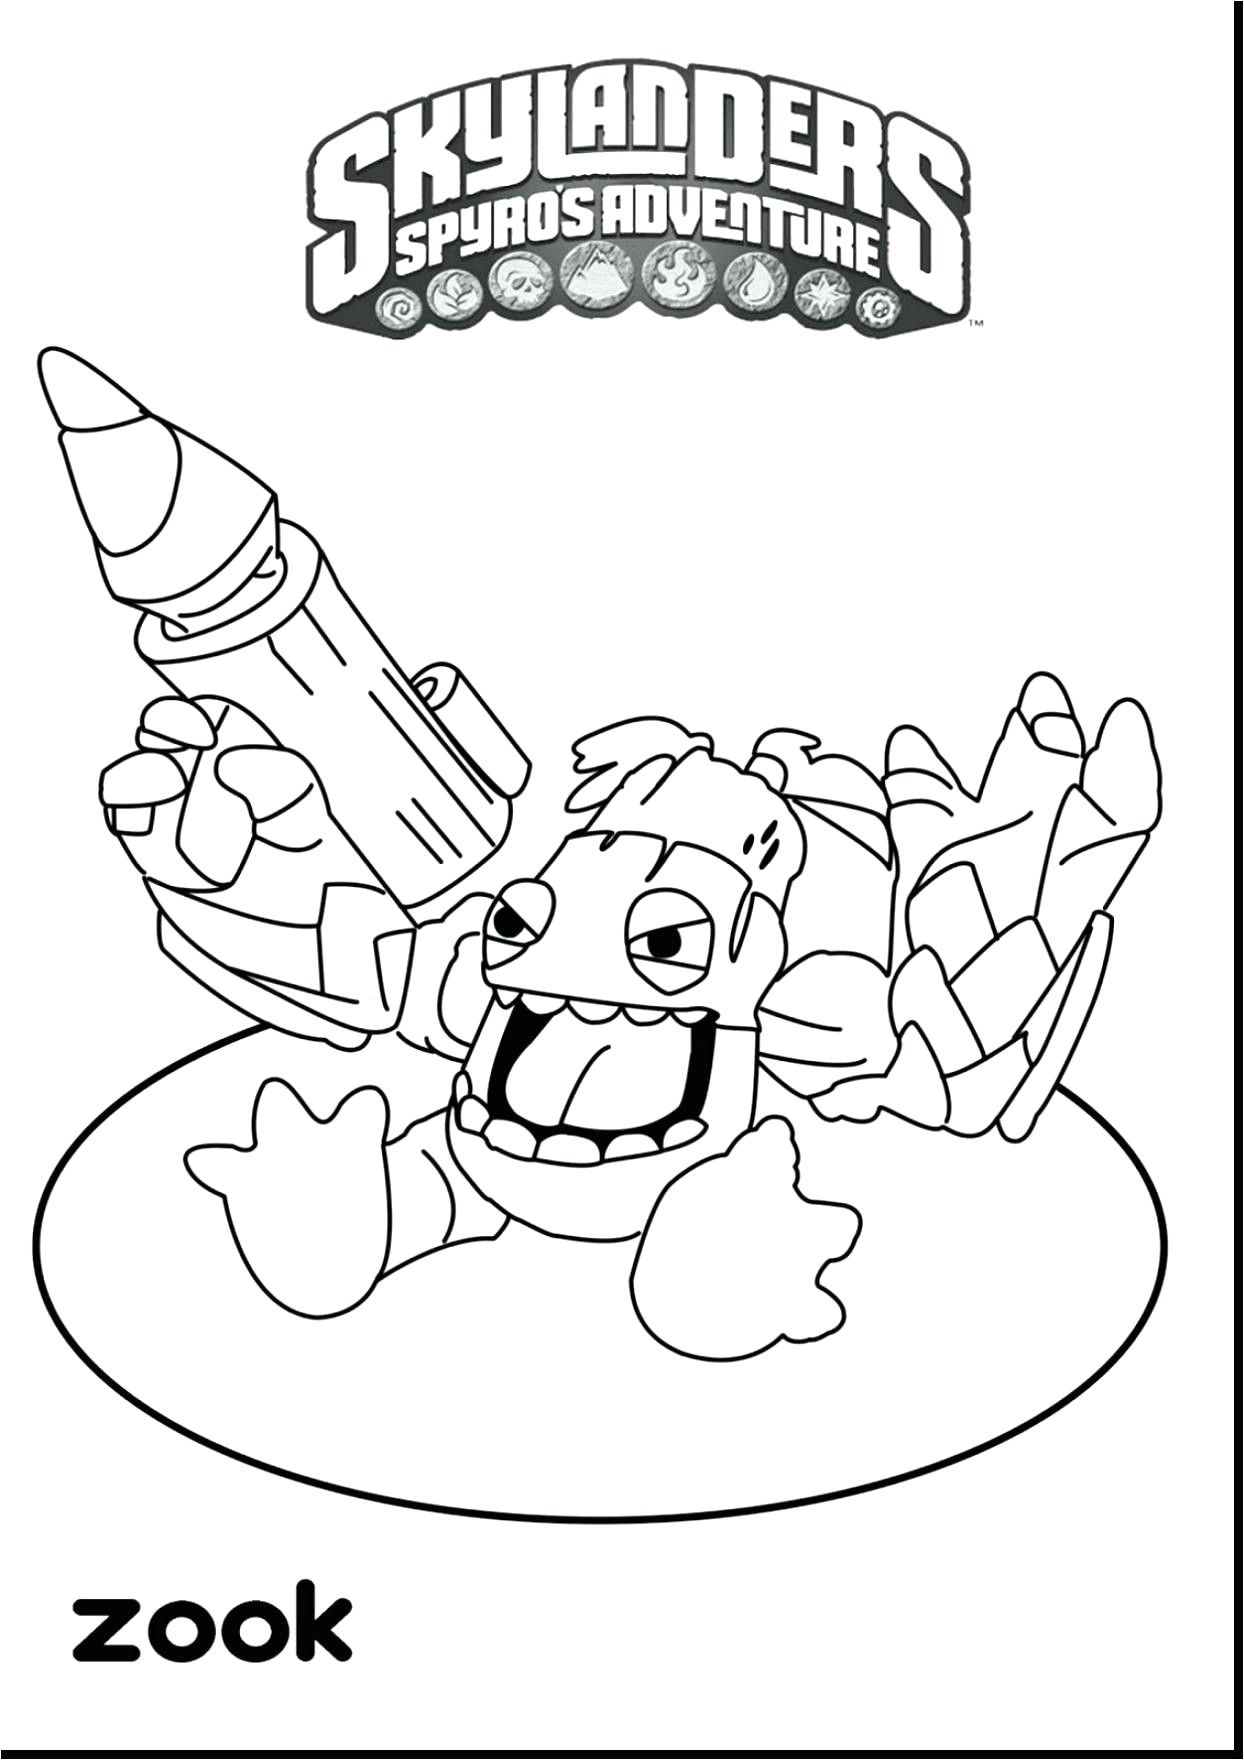 Cool Coloring Page Inspirational Witch Coloring Pages New Crayola Coloring Pages Games Awesome Pin by